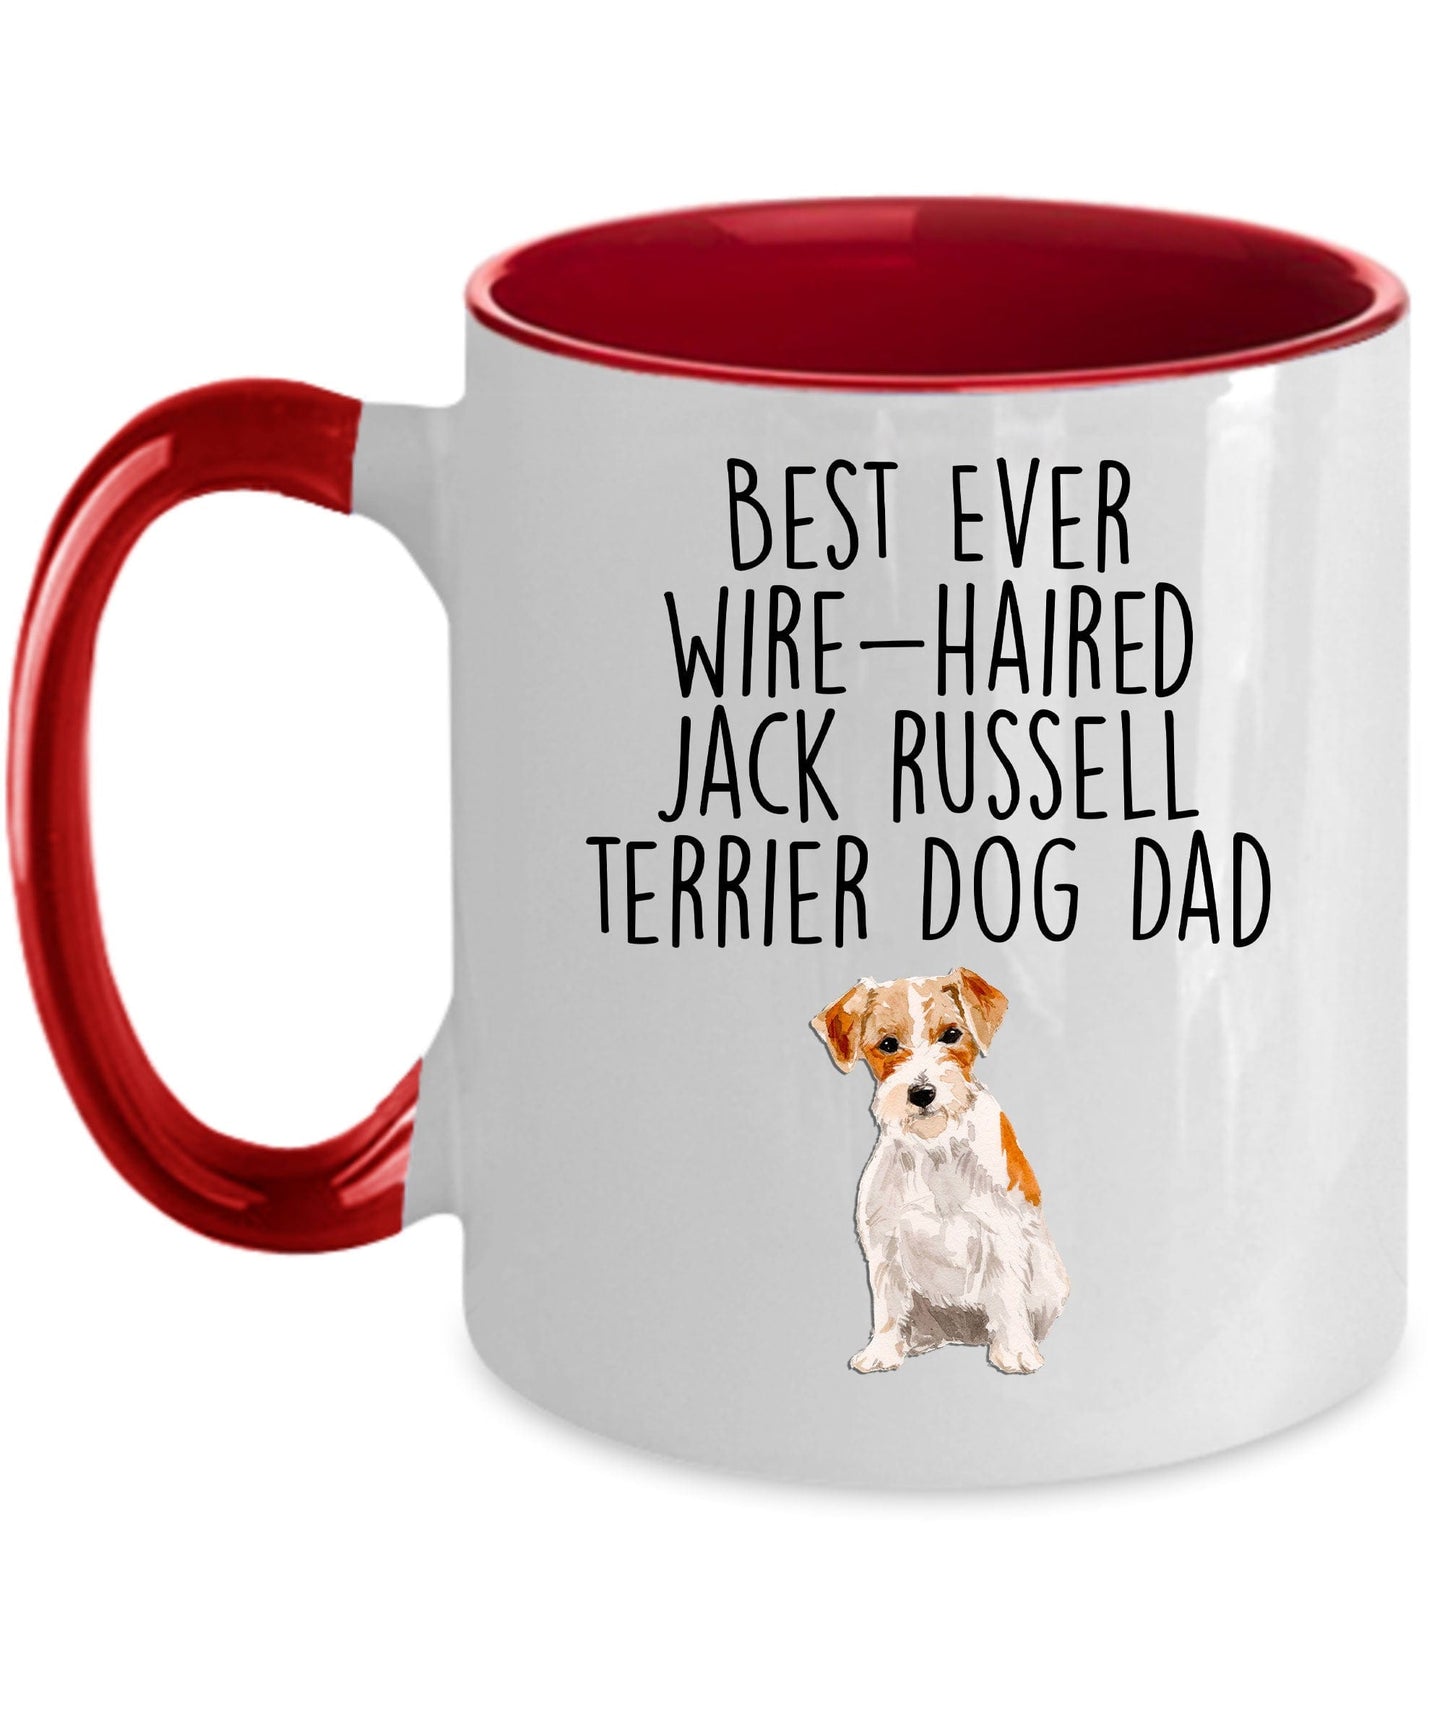 Best Ever Wire-haired Jack Russell Terrier Dog Dad Custom Ceramic Coffee Mug